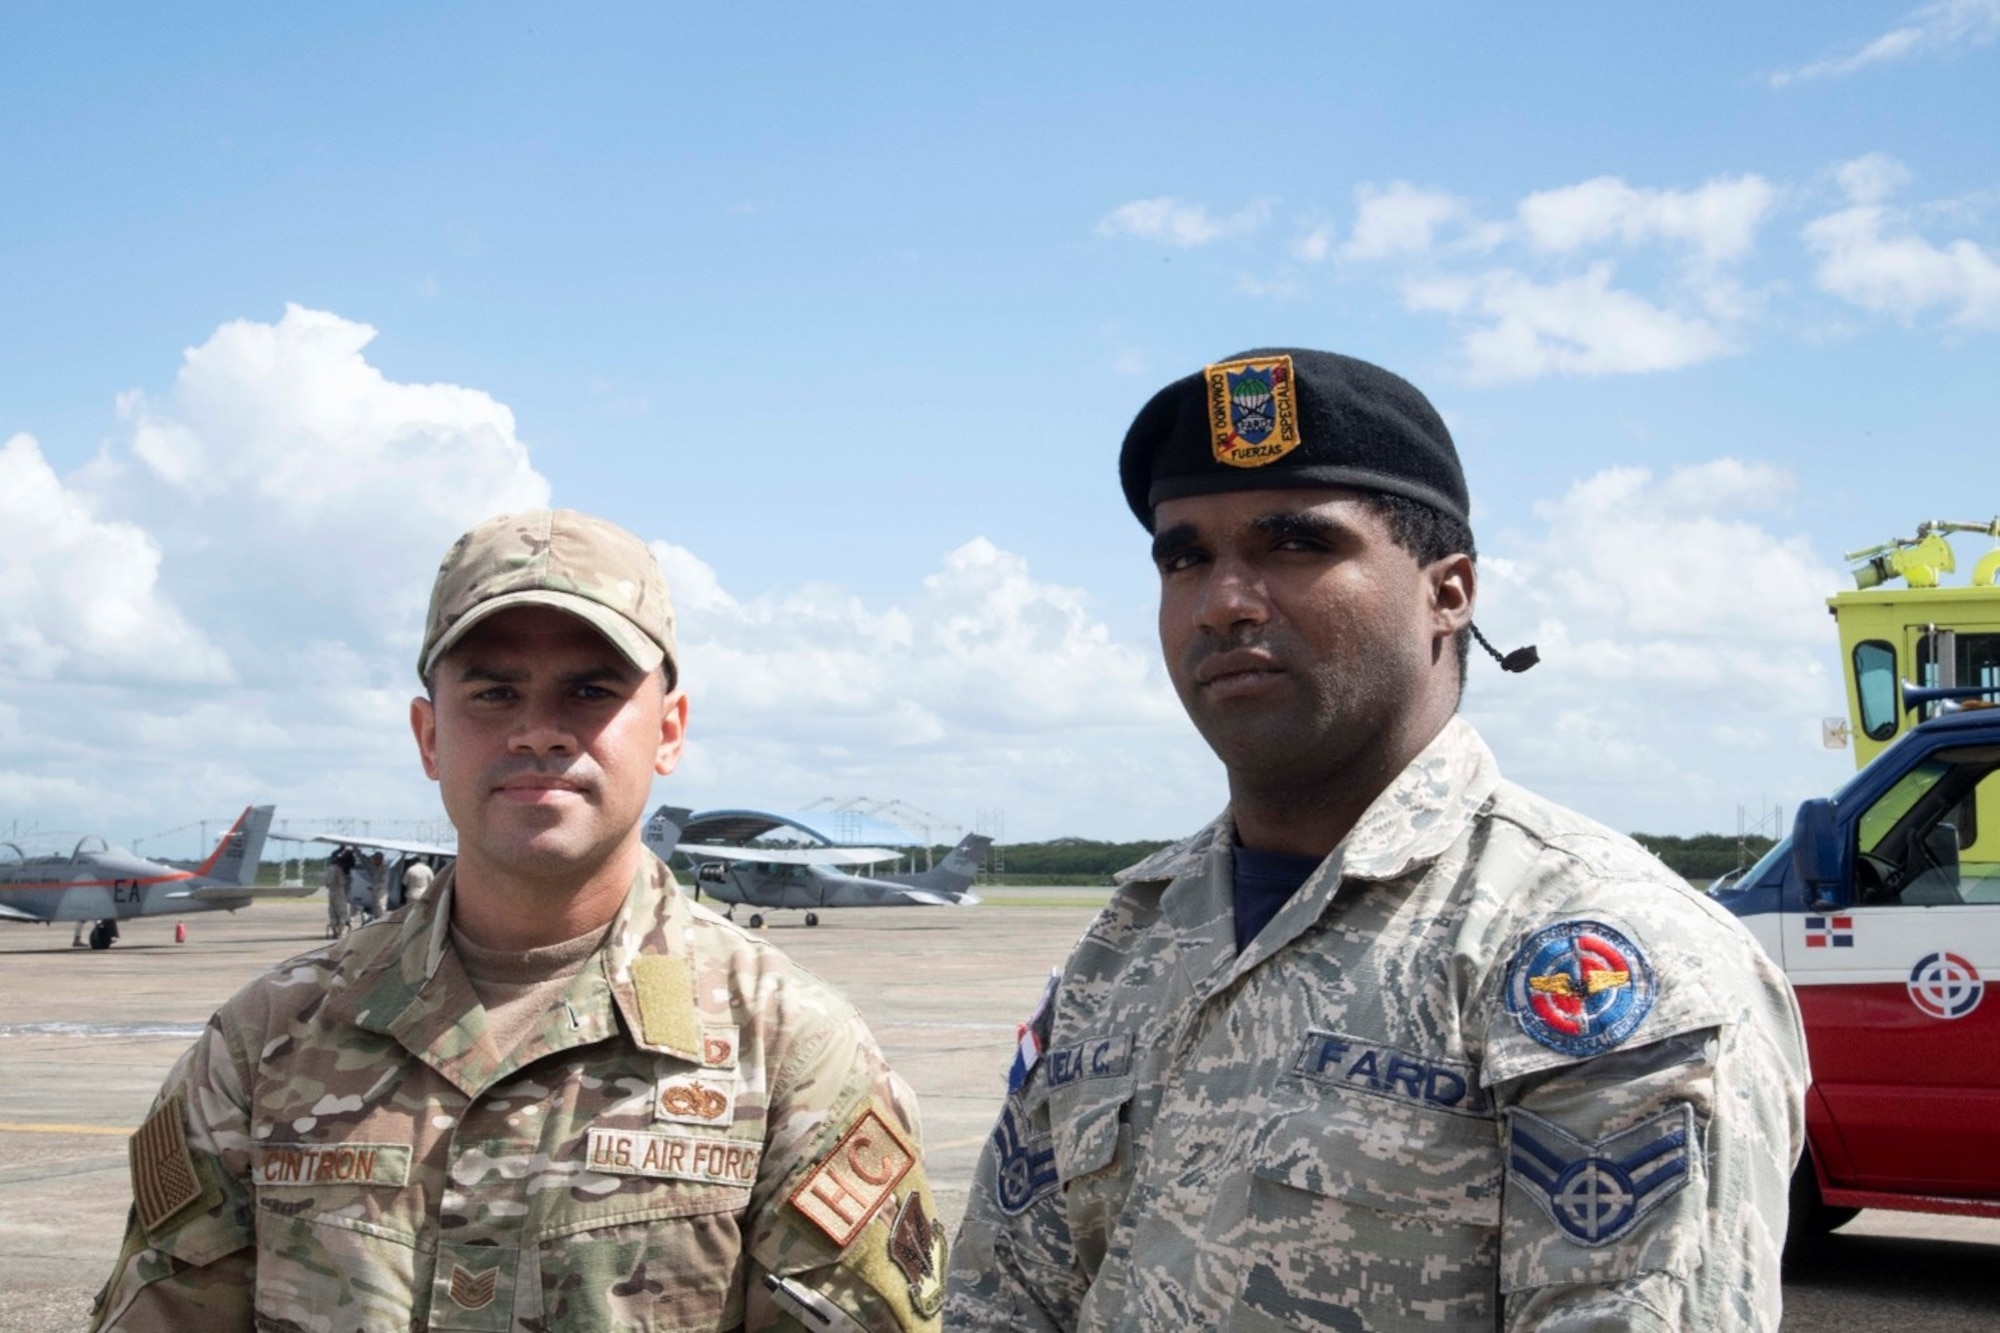 Fuerza Aérea de República Dominicana Cabo Zarzuela Cuevas, firefighter, right, and U.S. Air Force Tech. Sgt. Giancarlo Cintron, religious affairs noncommissioned officer and Language Enabled Airman Program Scholar, stand on the flight line at San Isidro Air Base, Dominican Republic, Feb. 16, 2023. These members are preparing for exercise FORWARD TIGER, which was designed to build on longstanding partnerships throughout the Caribbean and contribute to enhanced military readiness, humanitarian relief, and disaster response capabilities. (U.S. Air Force photo by 1st Lt. Christian Little)